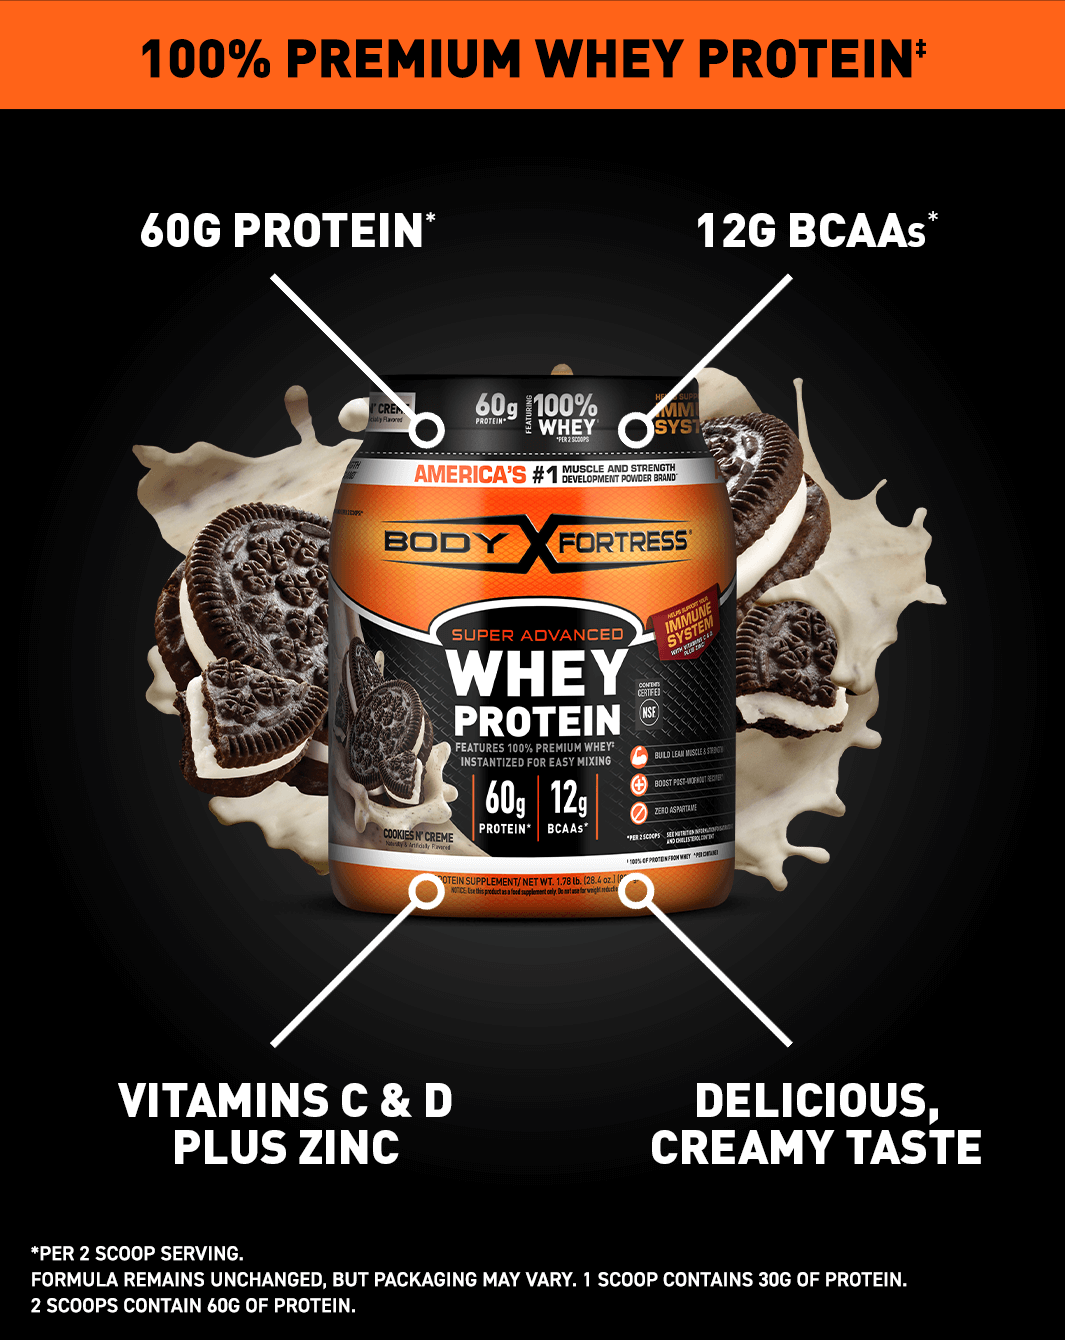 Super Advanced Whey, Premium Protein Powder, Cookies N' Cream;100% Premium Whey Protein; 60G Protein*; 12G BCAAs*; Vitamins C & D Plus Zinc; Delicious, Creamy taste. * Per 2 scoop serving. Formula remains unchanged, but packaging may vary. 1 scoop contains 30G of protein. 2 scoops contain 60G of protein. 